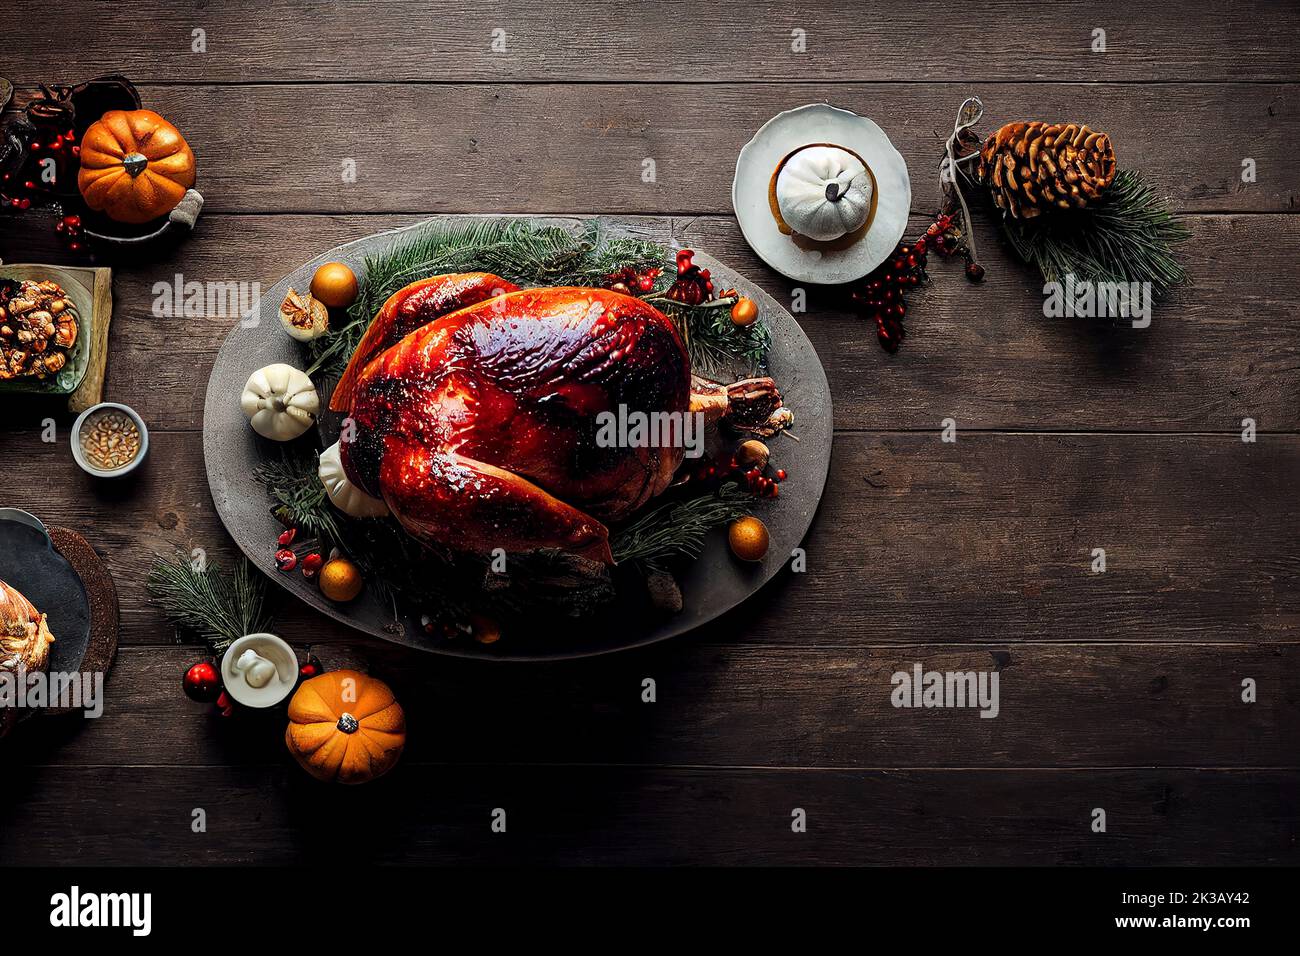 Table with roasted turkey and fixings, traditional Thanksgiving Holiday celebration food, food photography and illustration Stock Photo